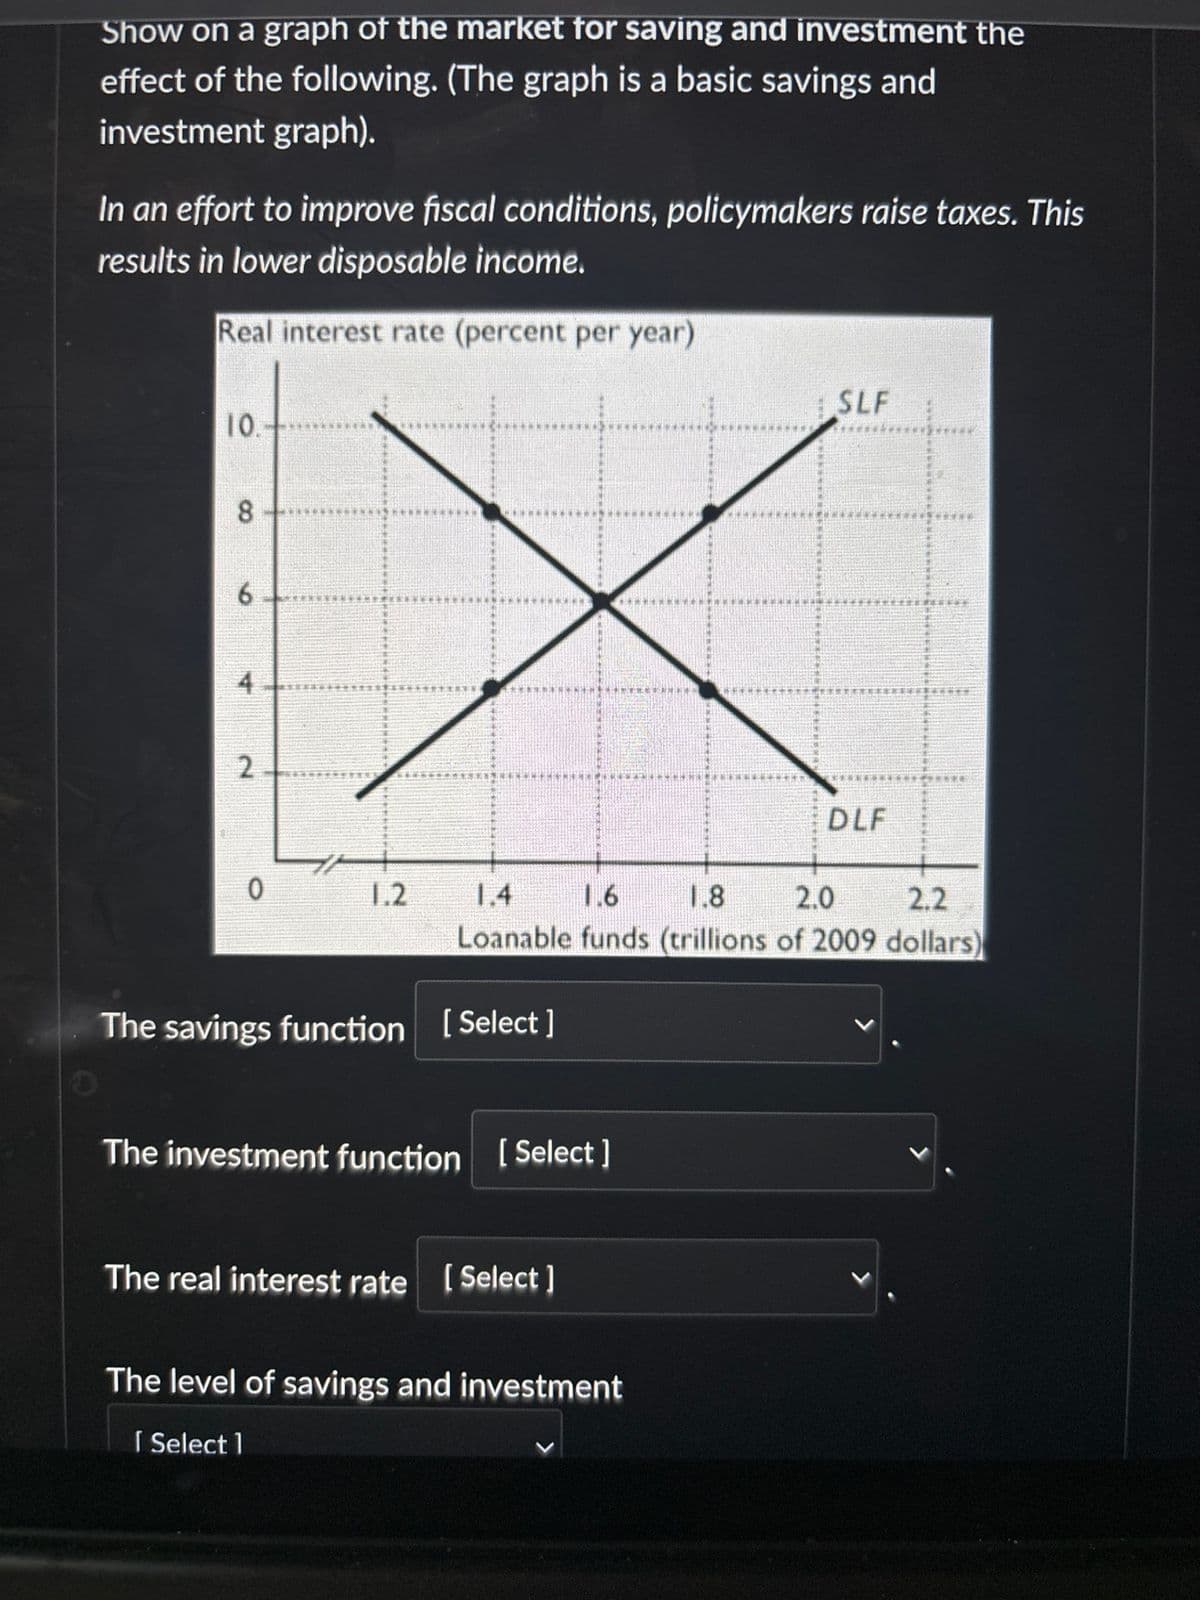 Show on a graph of the market for saving and investment the
effect of the following. (The graph is a basic savings and
investment graph).
In an effort to improve fiscal conditions, policymakers raise taxes. This
results in lower disposable income.
Real interest rate (percent per year)
10.
8
6
4
2
SLF
0
1.2
1.4
1.6
DLF
2.0
2.2
1.8
Loanable funds (trillions of 2009 dollars)
The savings function [Select]
The investment function [Select]
The real interest rate [Select]
The level of savings and investment
[Select]